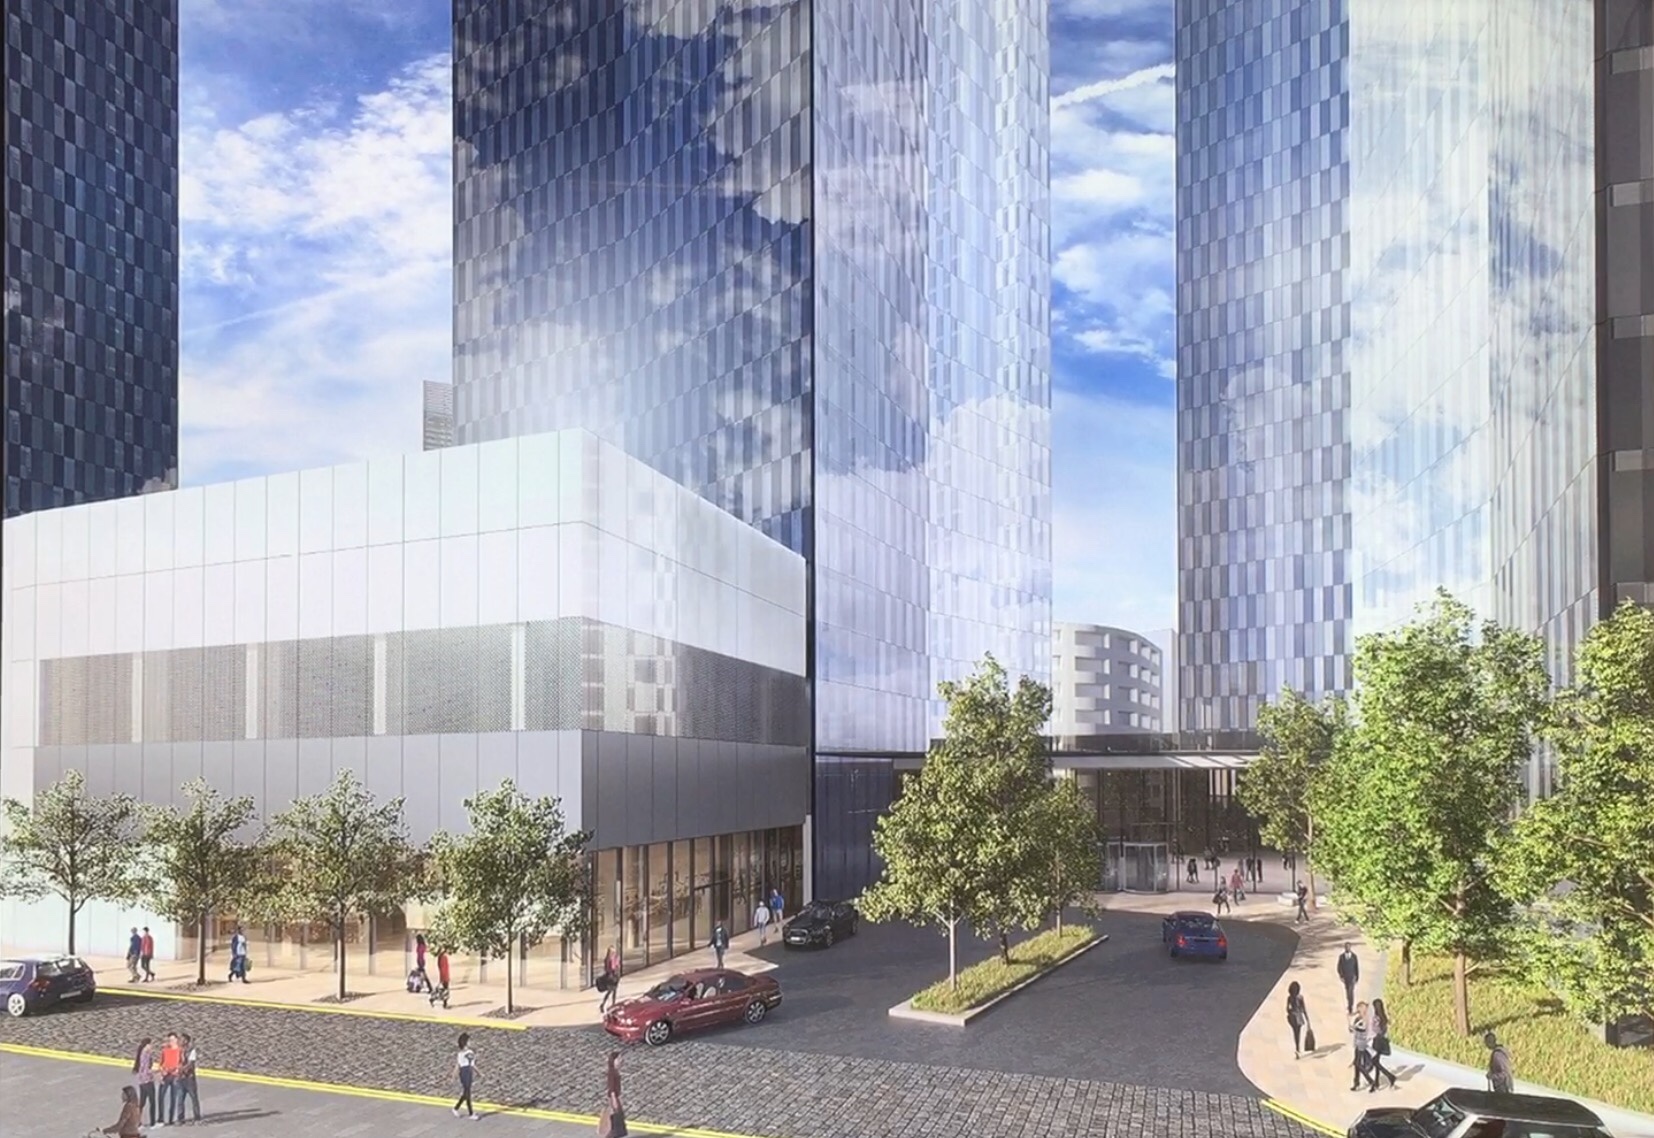 Plan For Cluster Of Four Skyscrapers In Manchester Construction